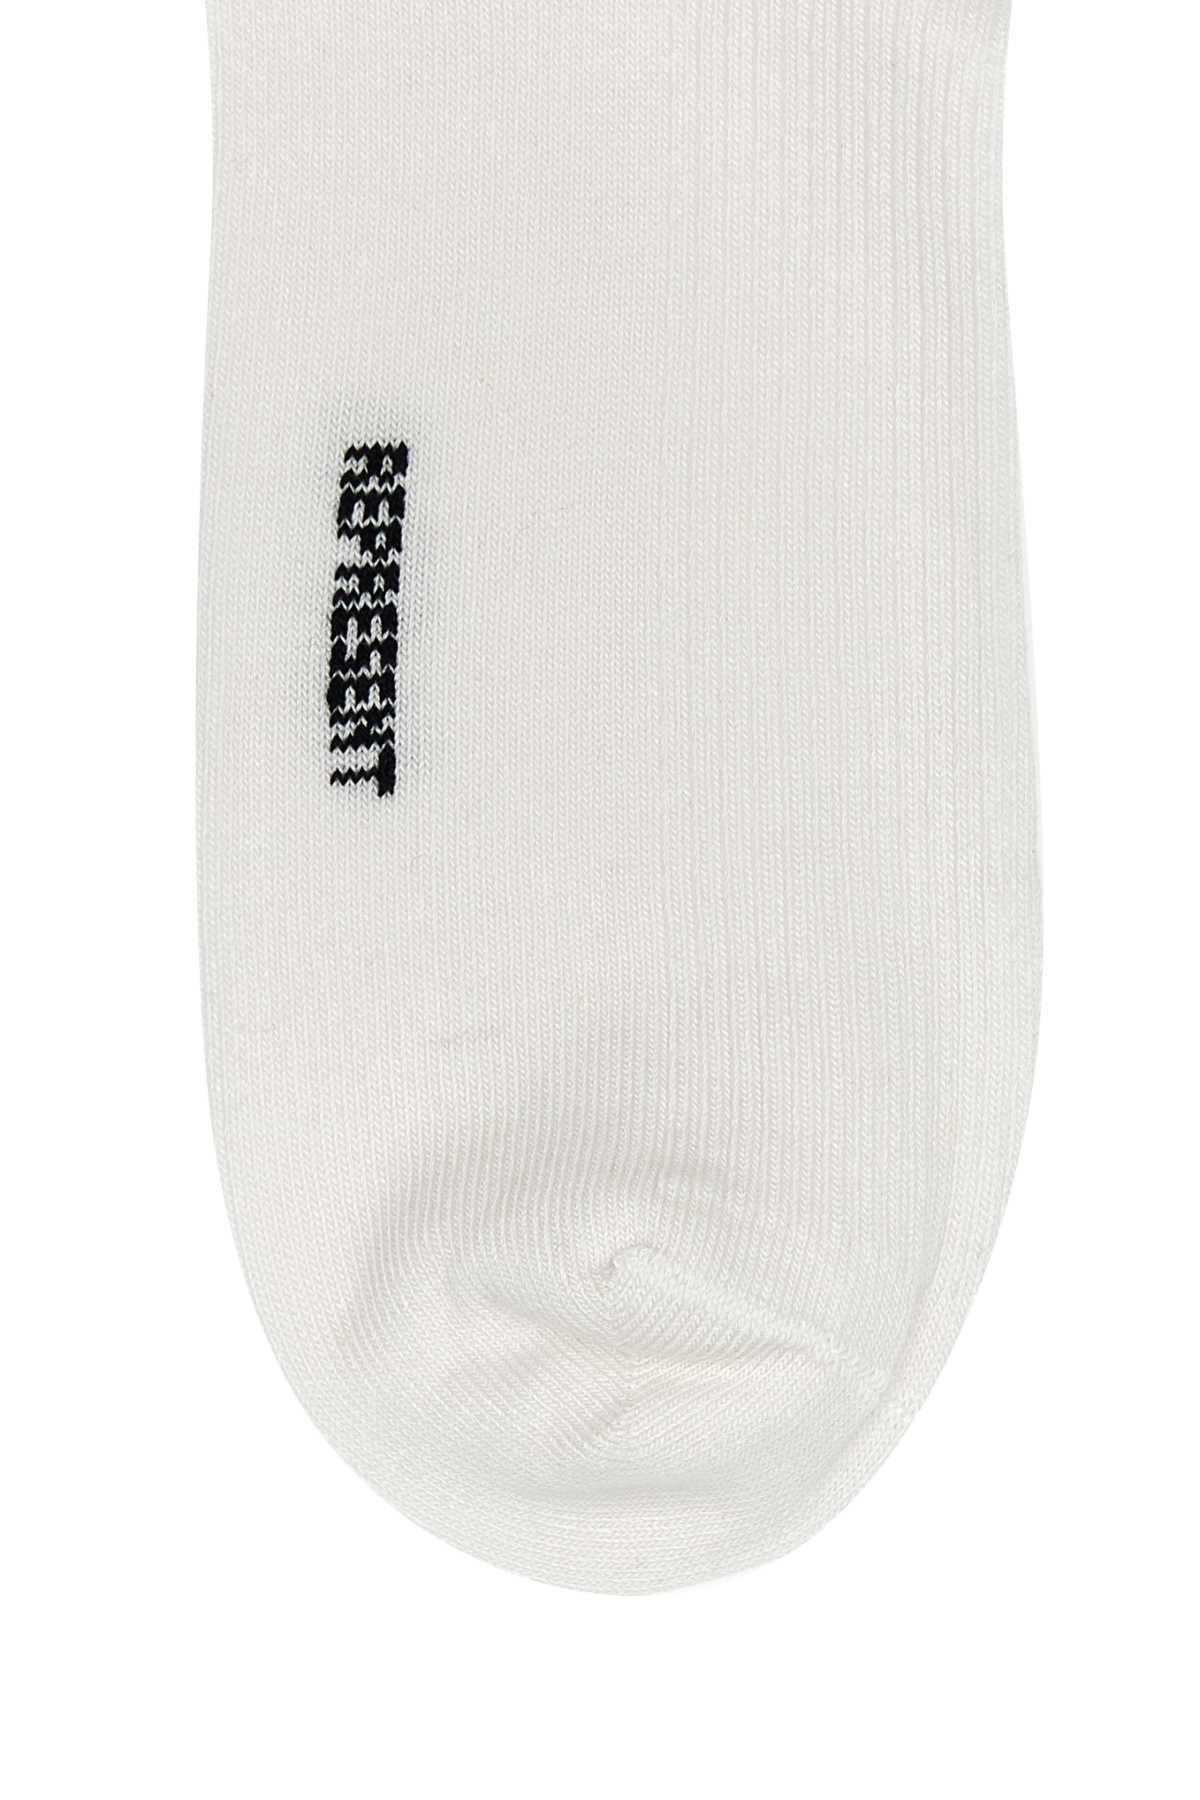 Represent White Cotton And Acrylic Socks In 01